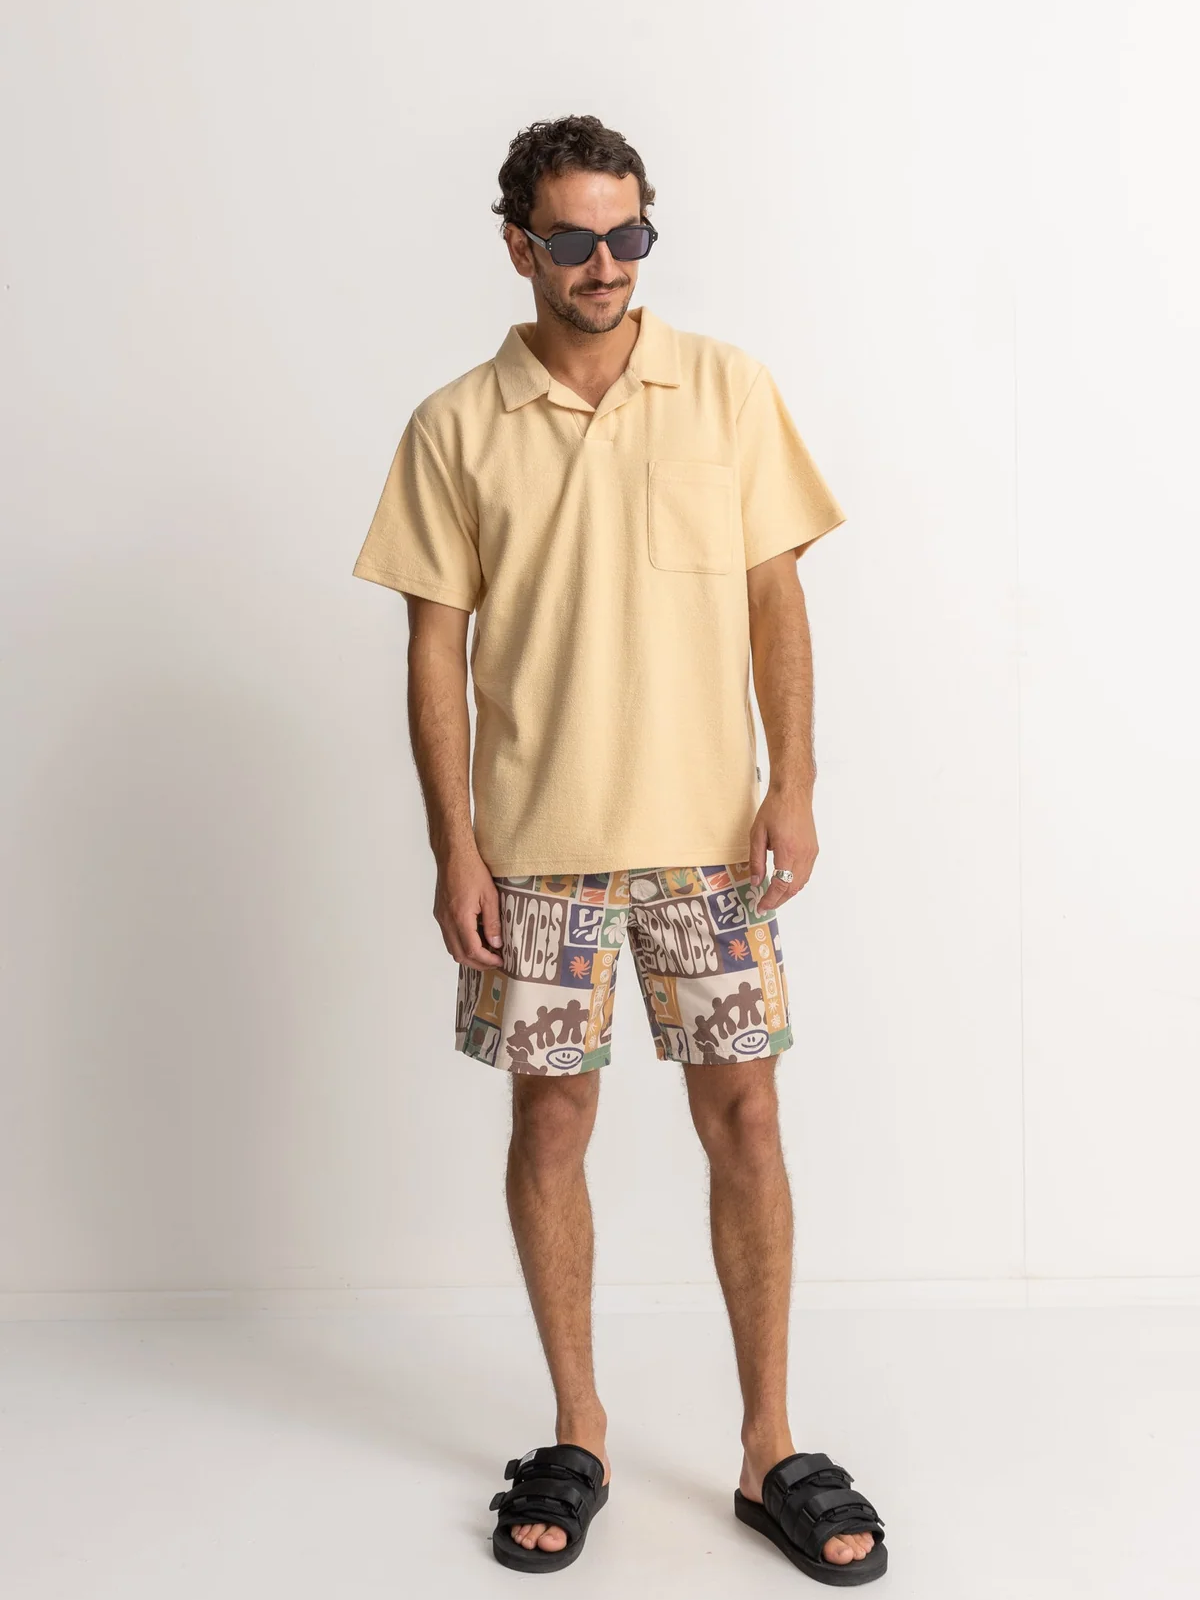 rhythm vintage terry polo sand tan cream butter colorway ss short sleeve kempt athens ga georgia men's clothing store